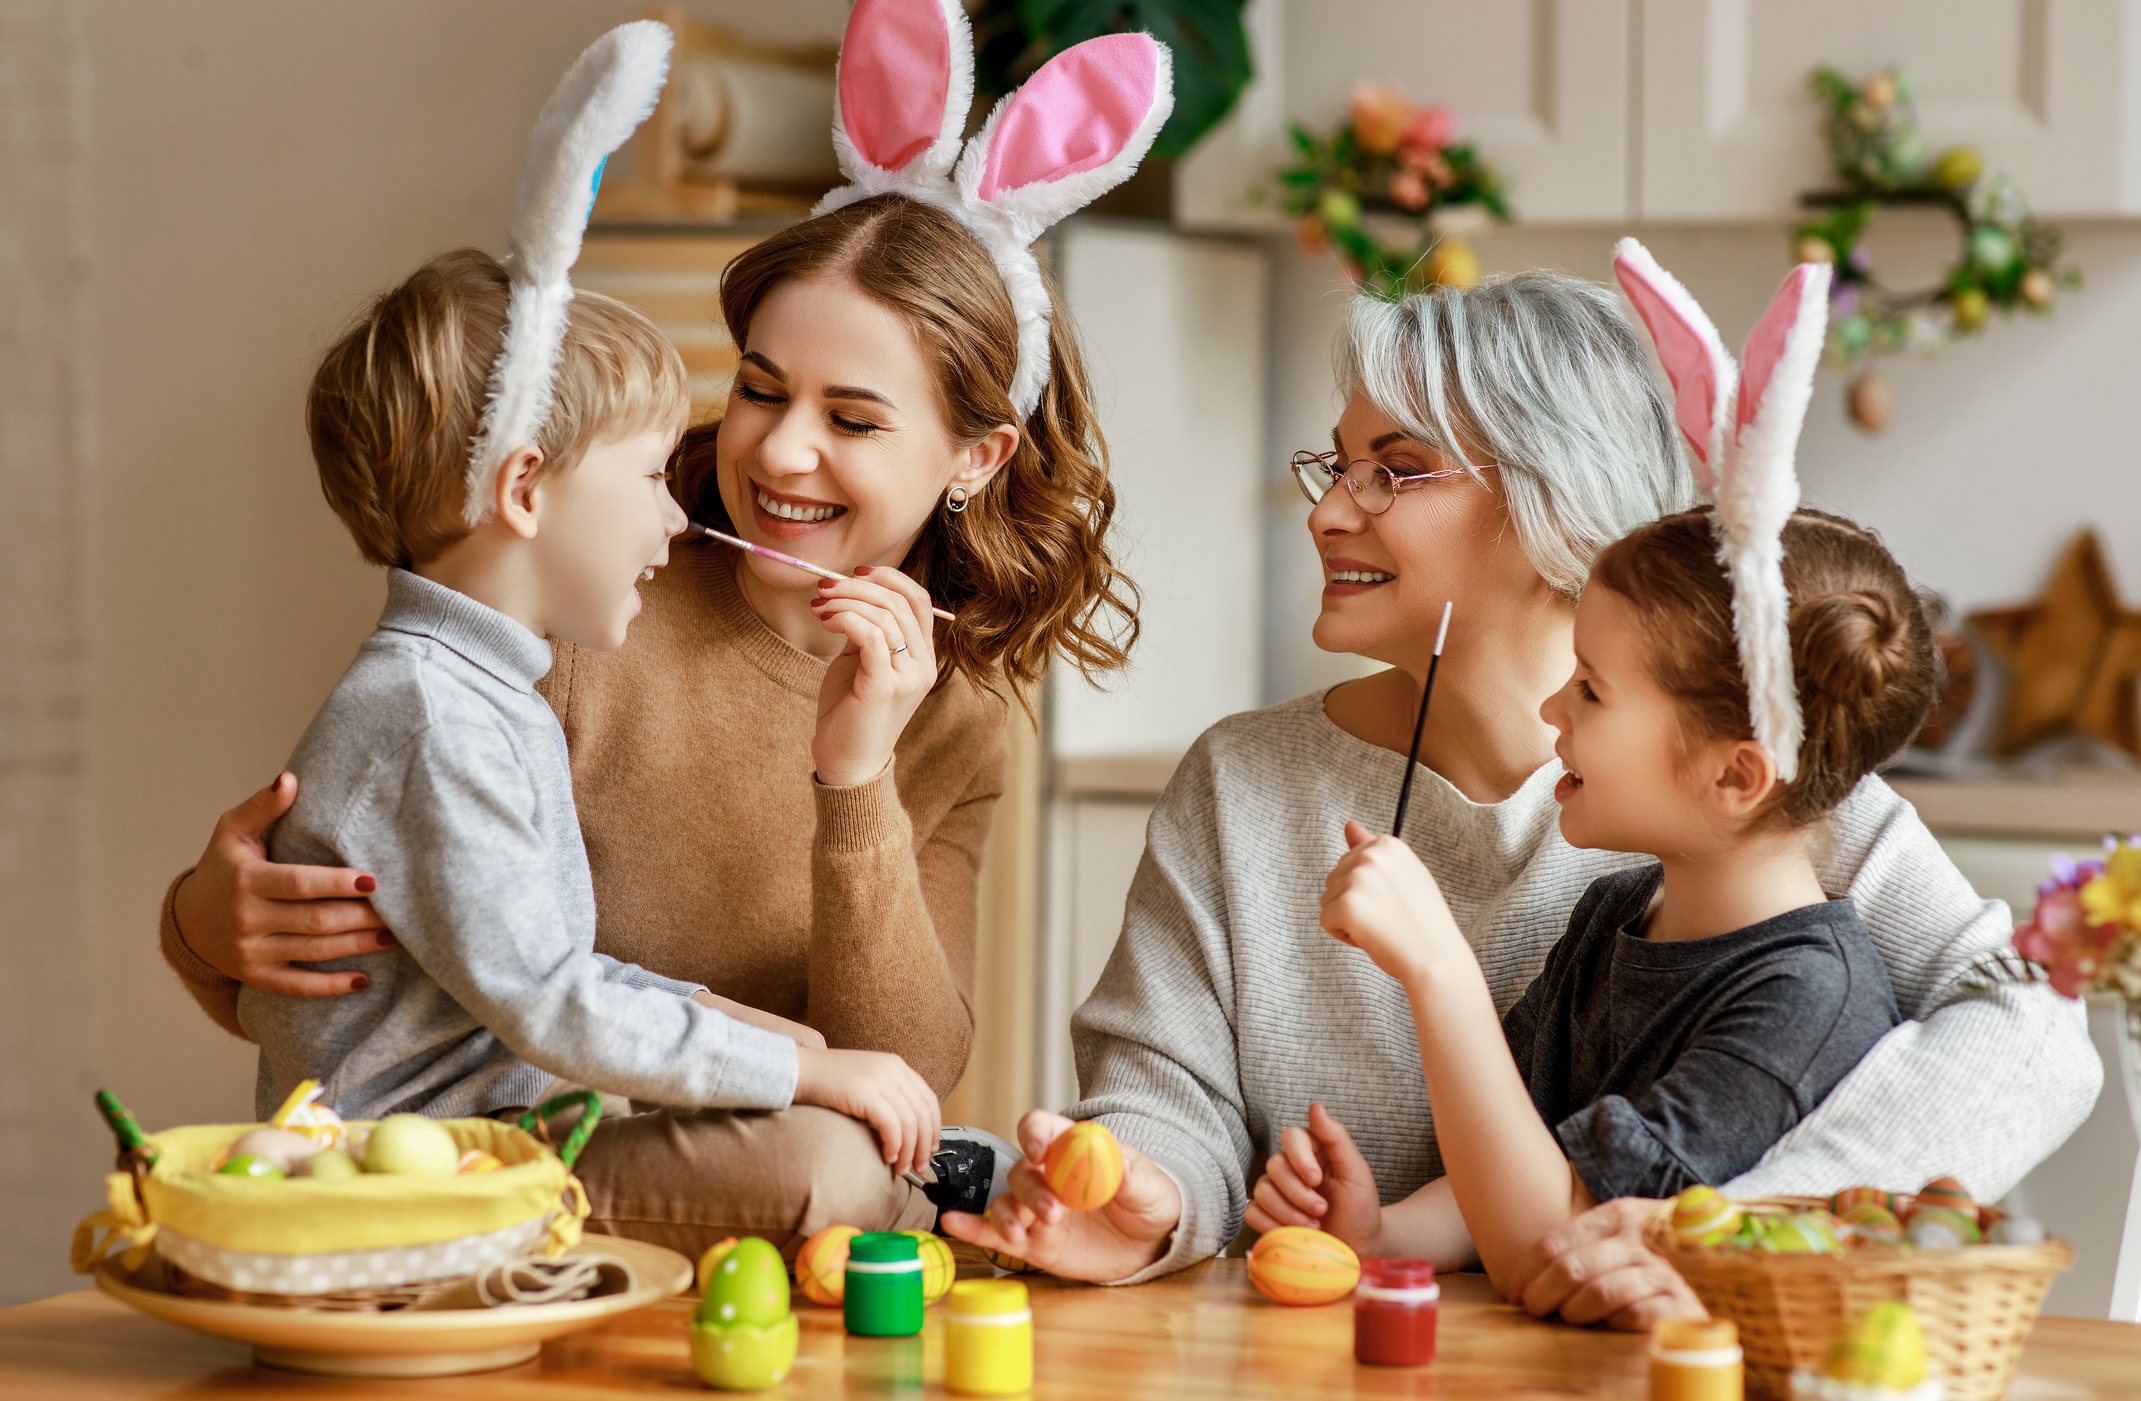 Celebrate Spring in Grapevine with the latest Easter 2021 Celebration Ideas From Park Place